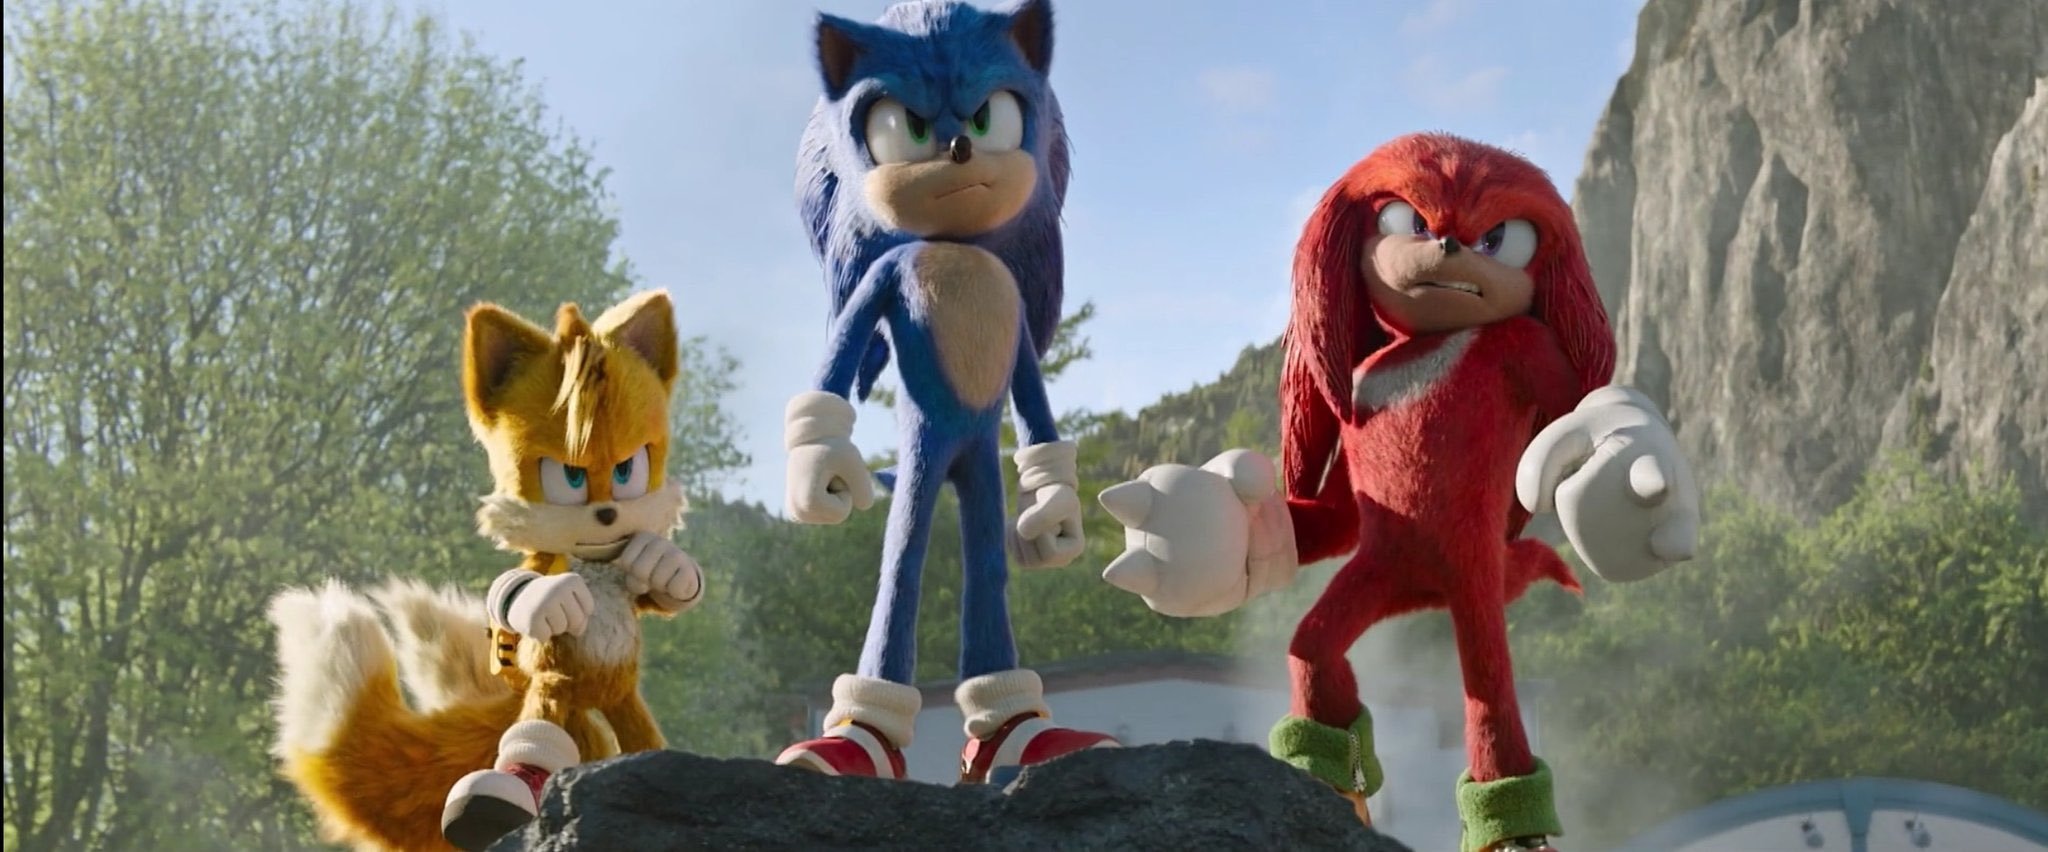 Sonic the Hedgehog 2 Review: Does it Live up 2 the Hype? (Minor Spoilers) —  CultureSlate